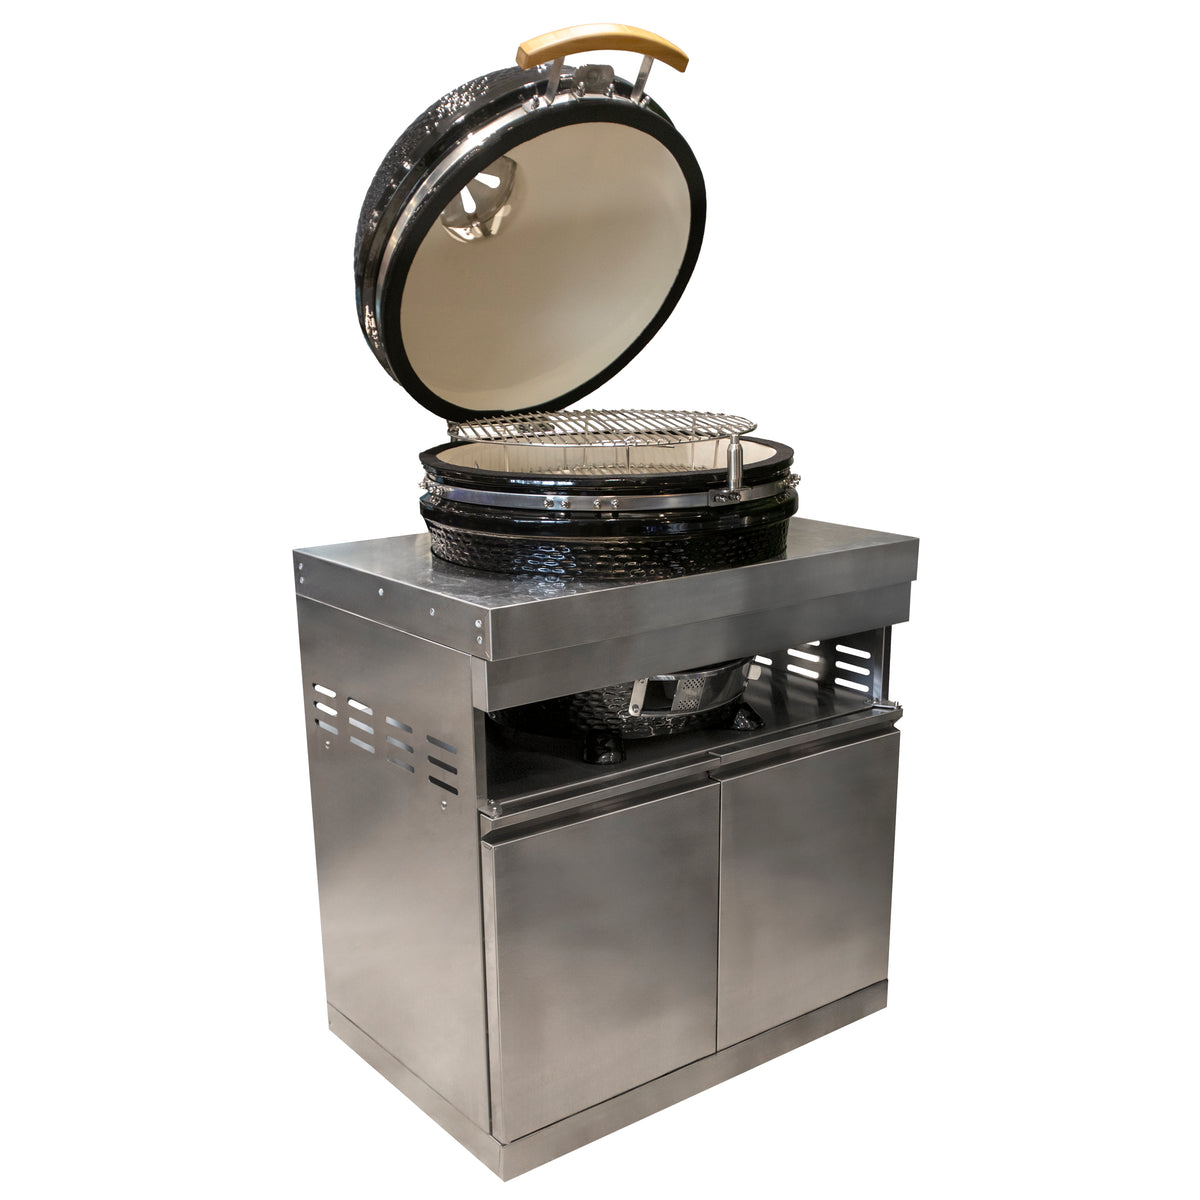 Draco Grills Outdoor Kitchen Stainless Steel Black Kamado Egg BBQ Unit